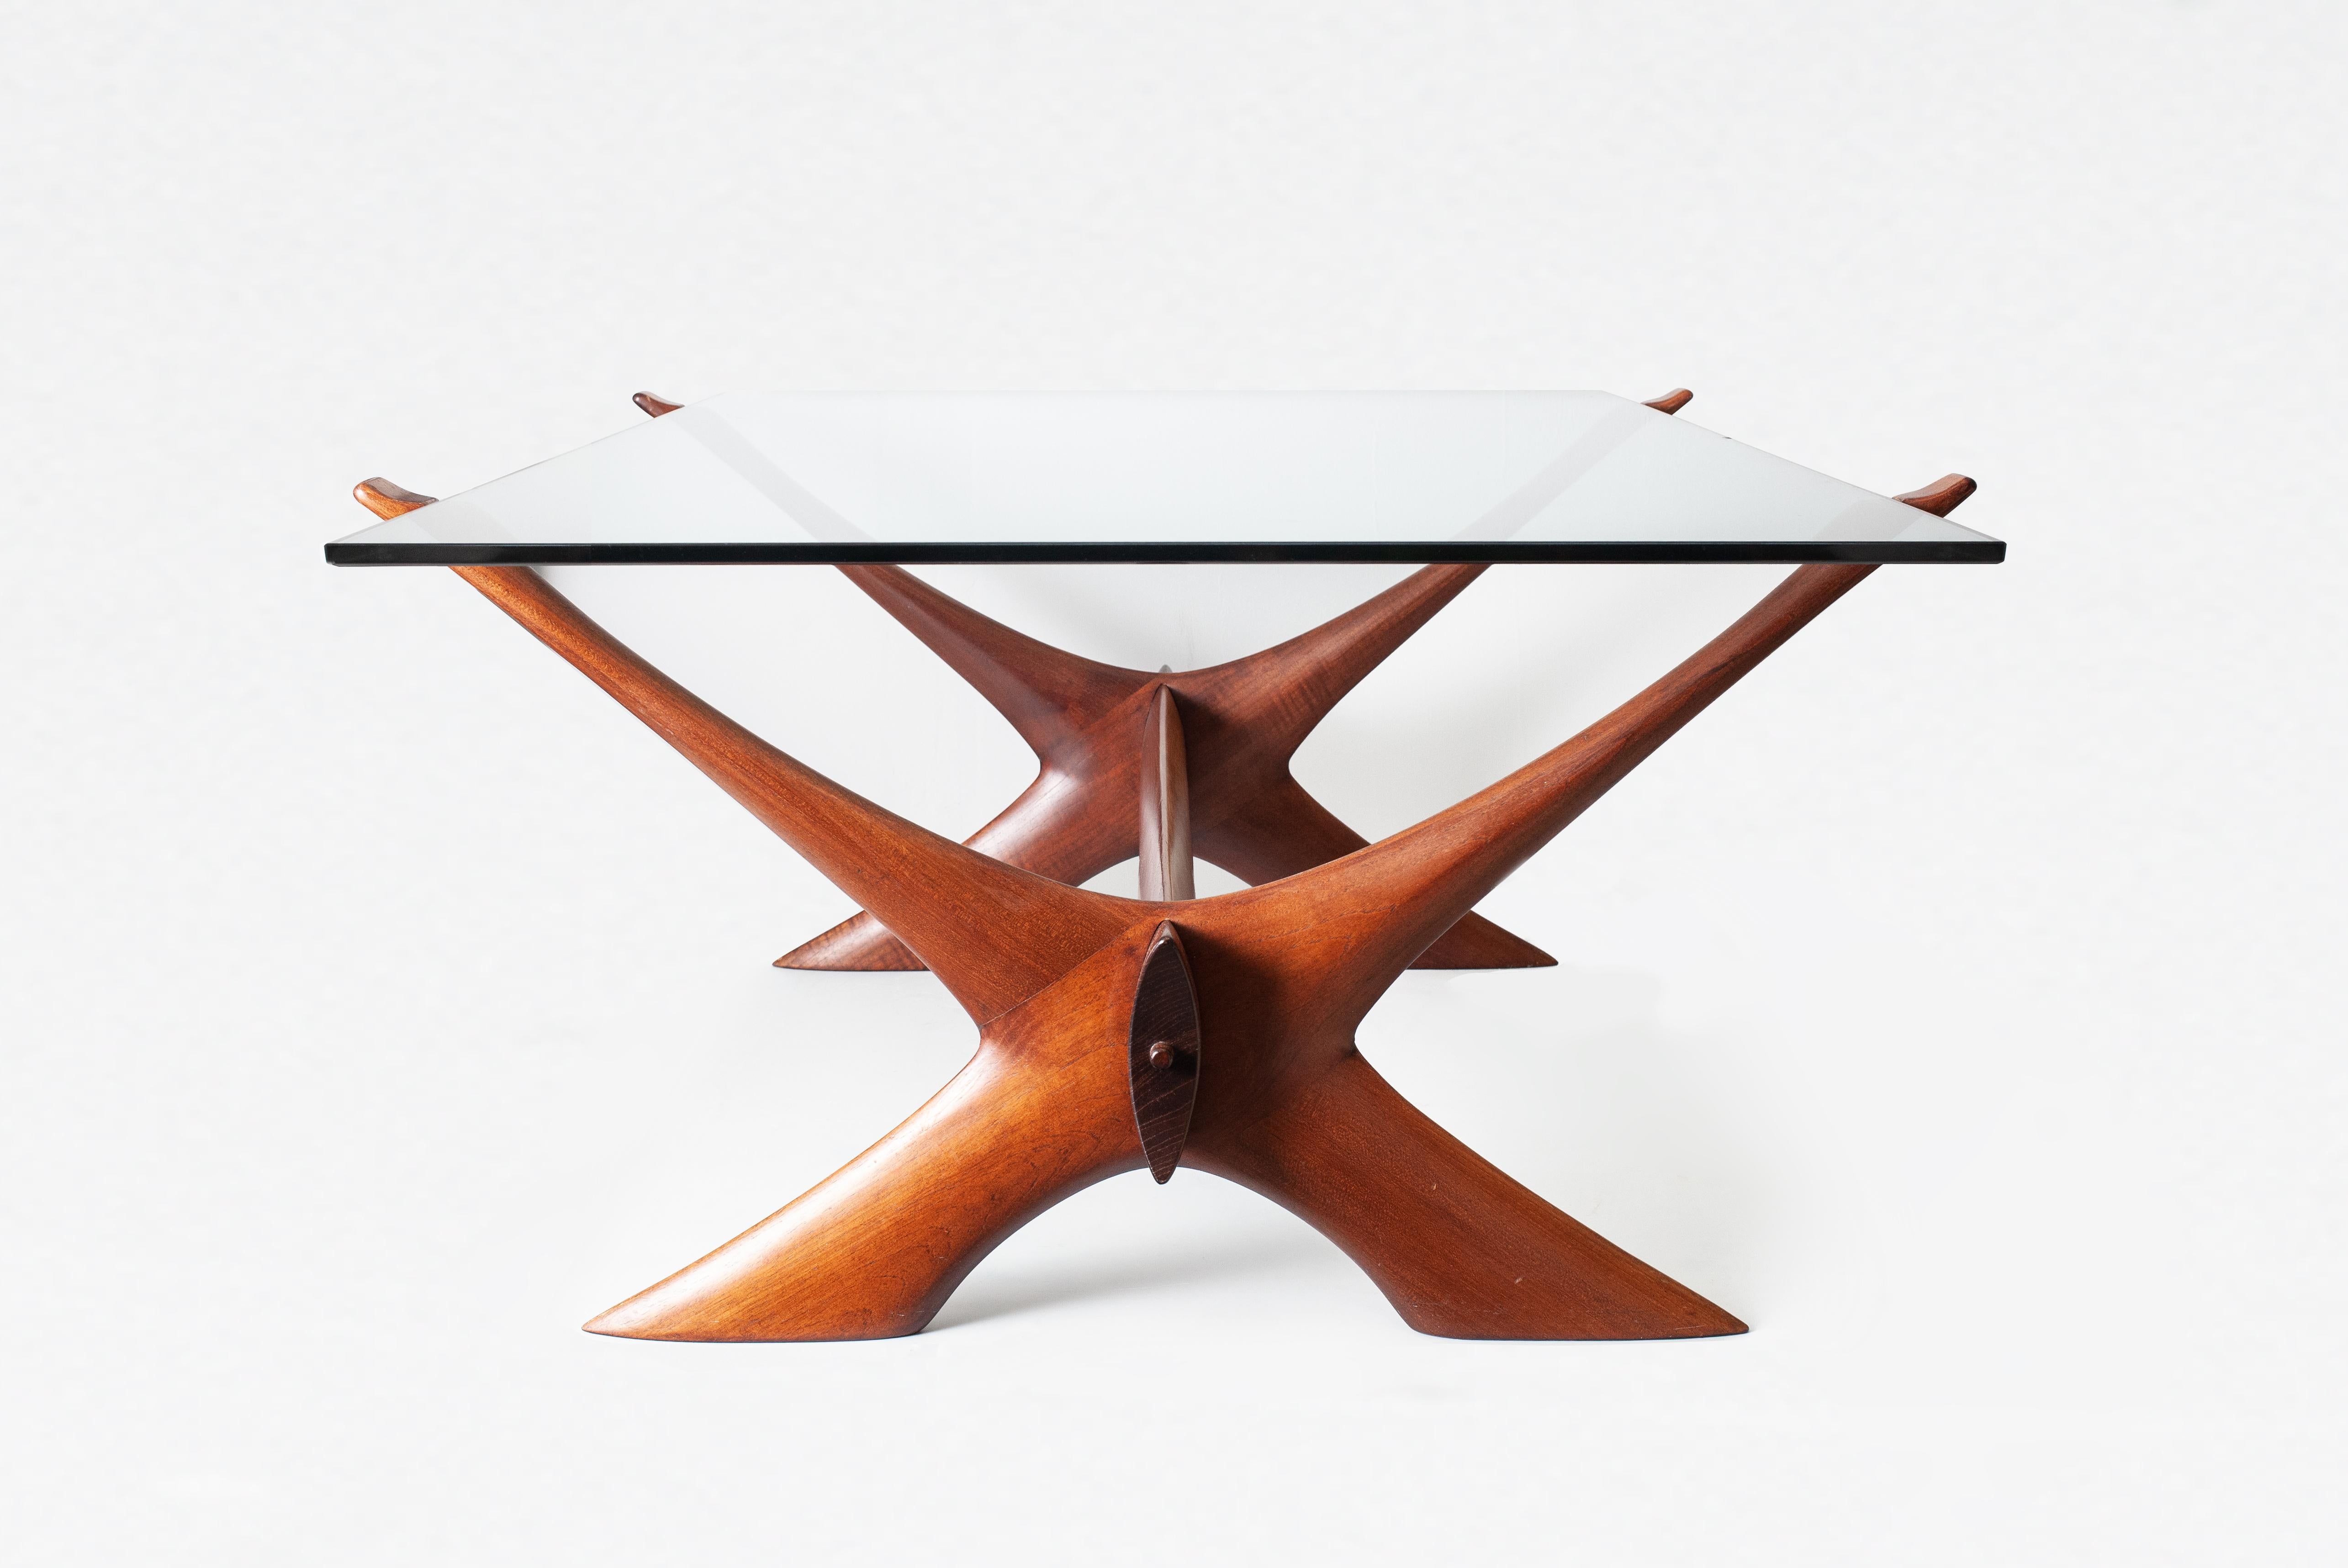 A great example of the “Condor” coffee table designed by Fredrik Schriever-Abeln for Örebro Glas, Sweden. The subtly green tinted glass top allowing the exquisitely crafted teak base in its double x configuration joined together by a cross beam to